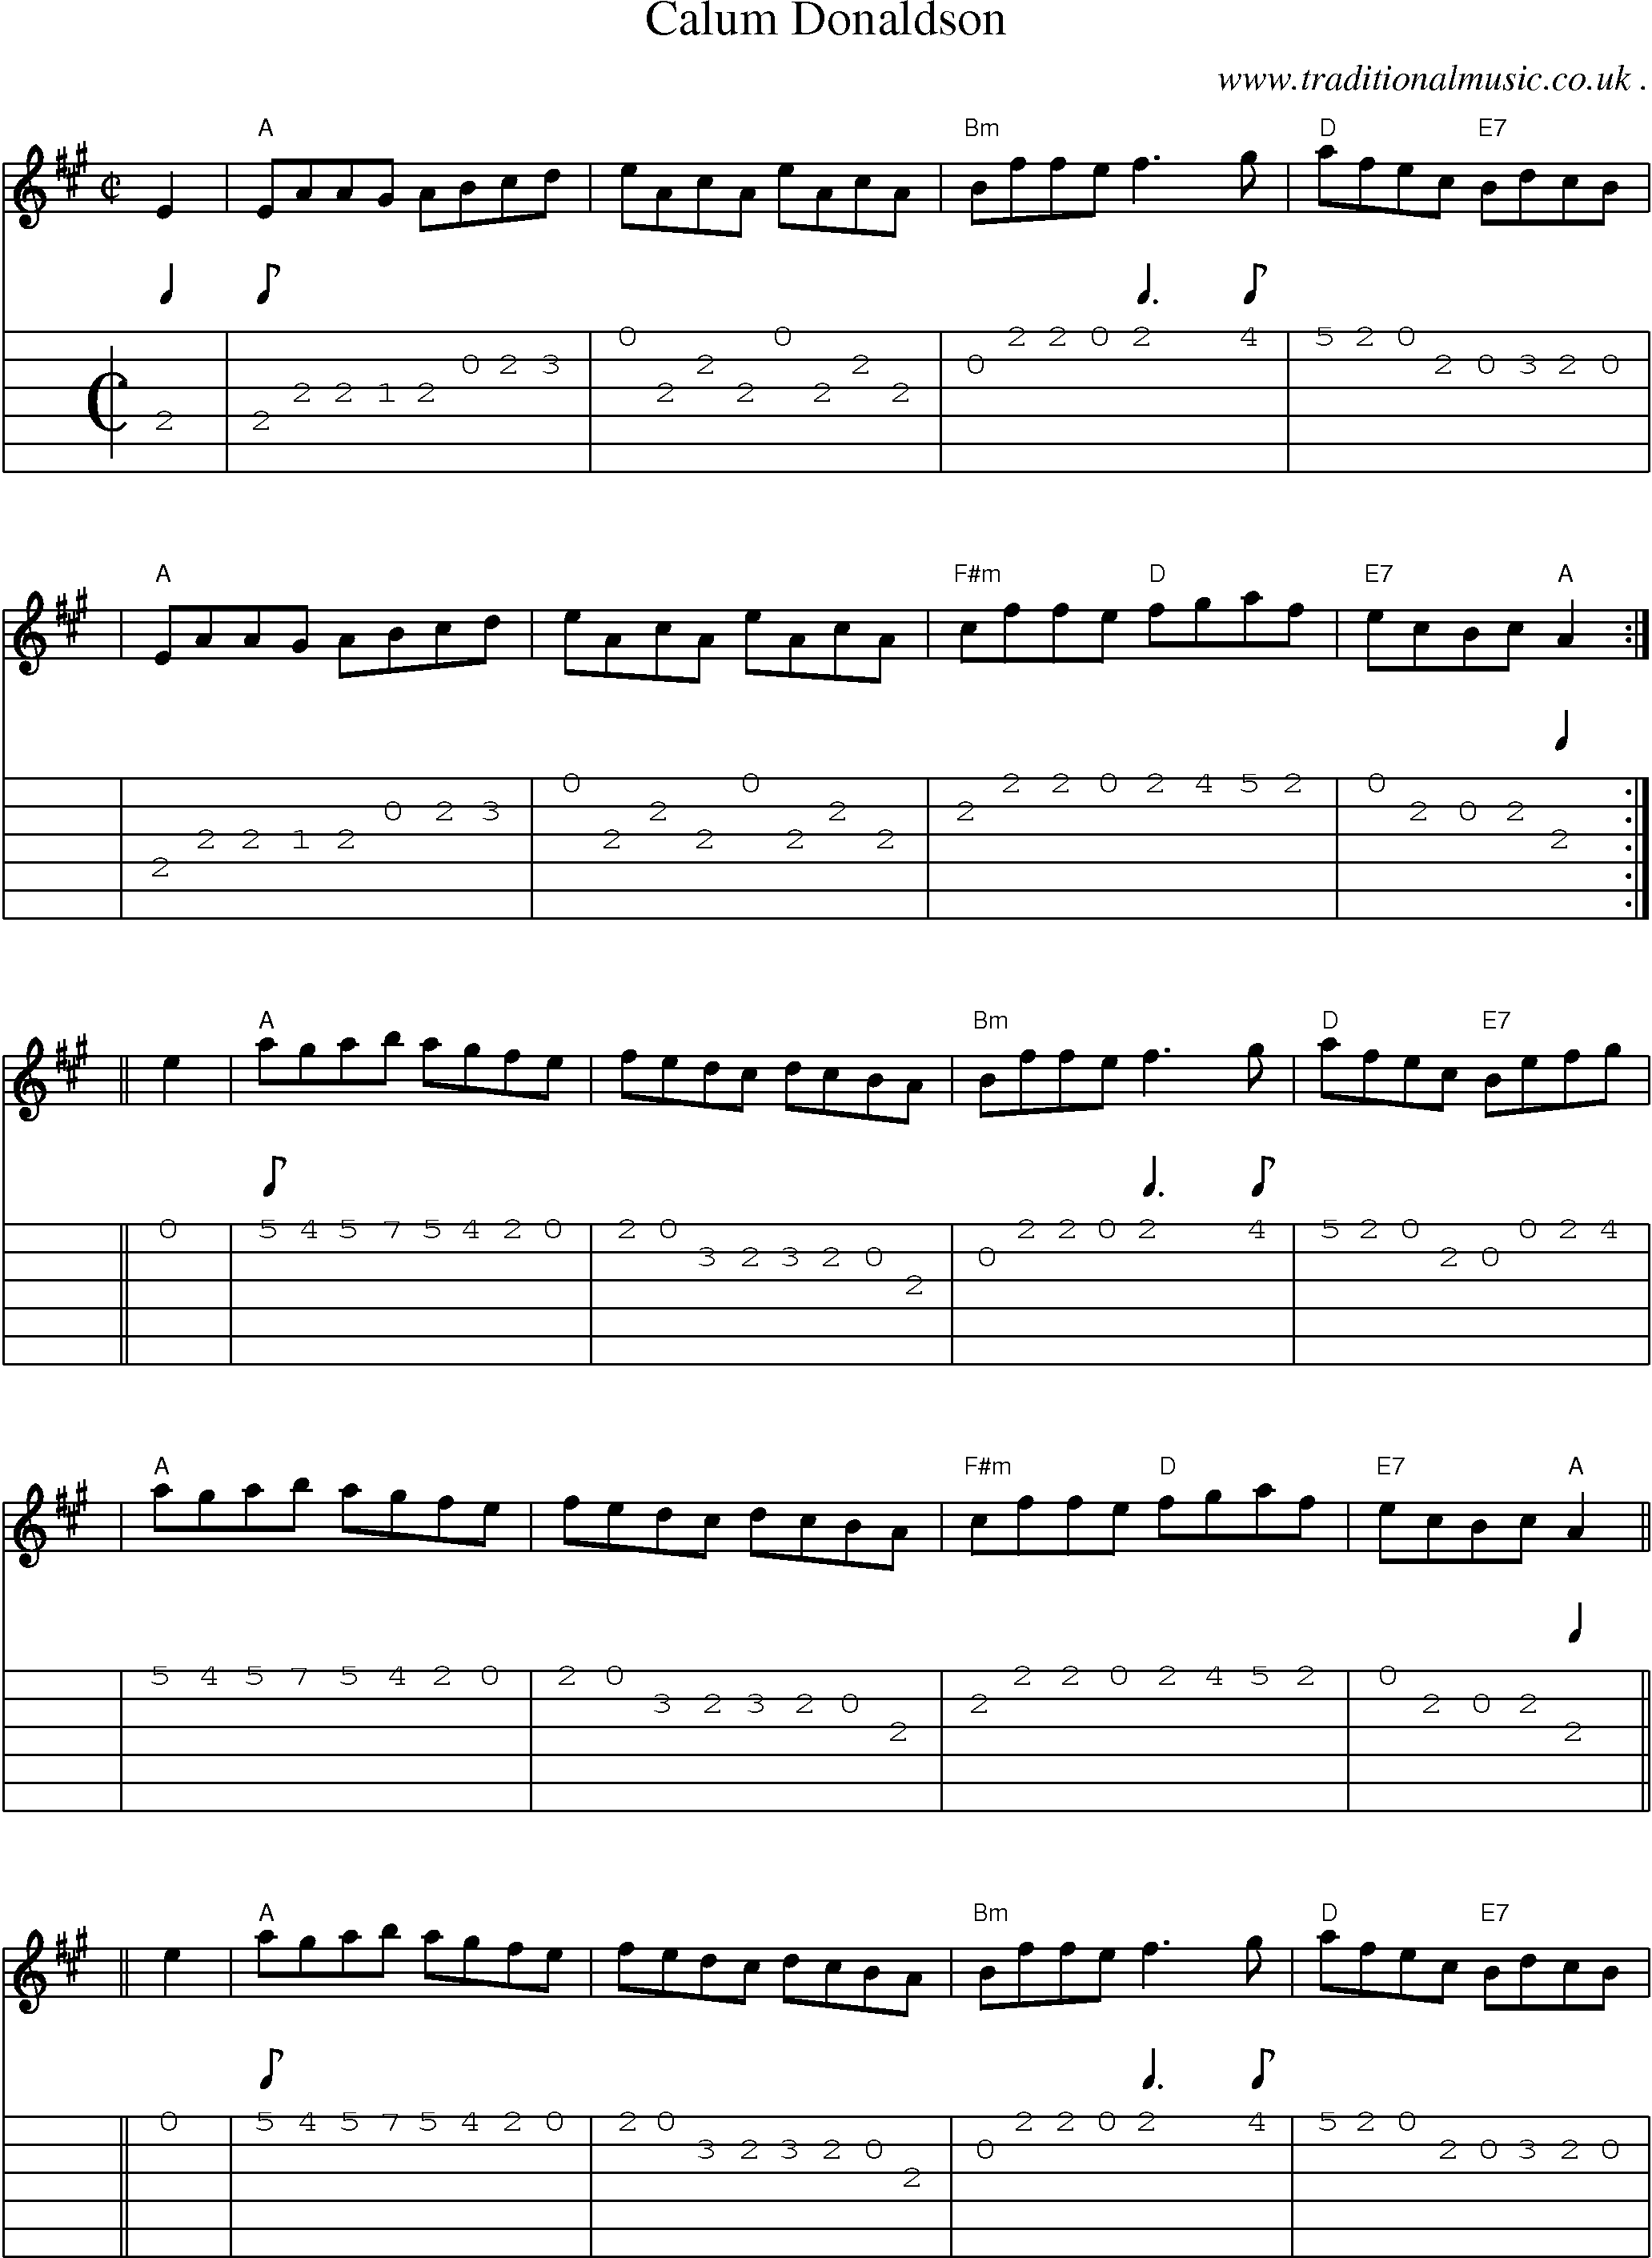 Sheet-music  score, Chords and Guitar Tabs for Calum Donaldson